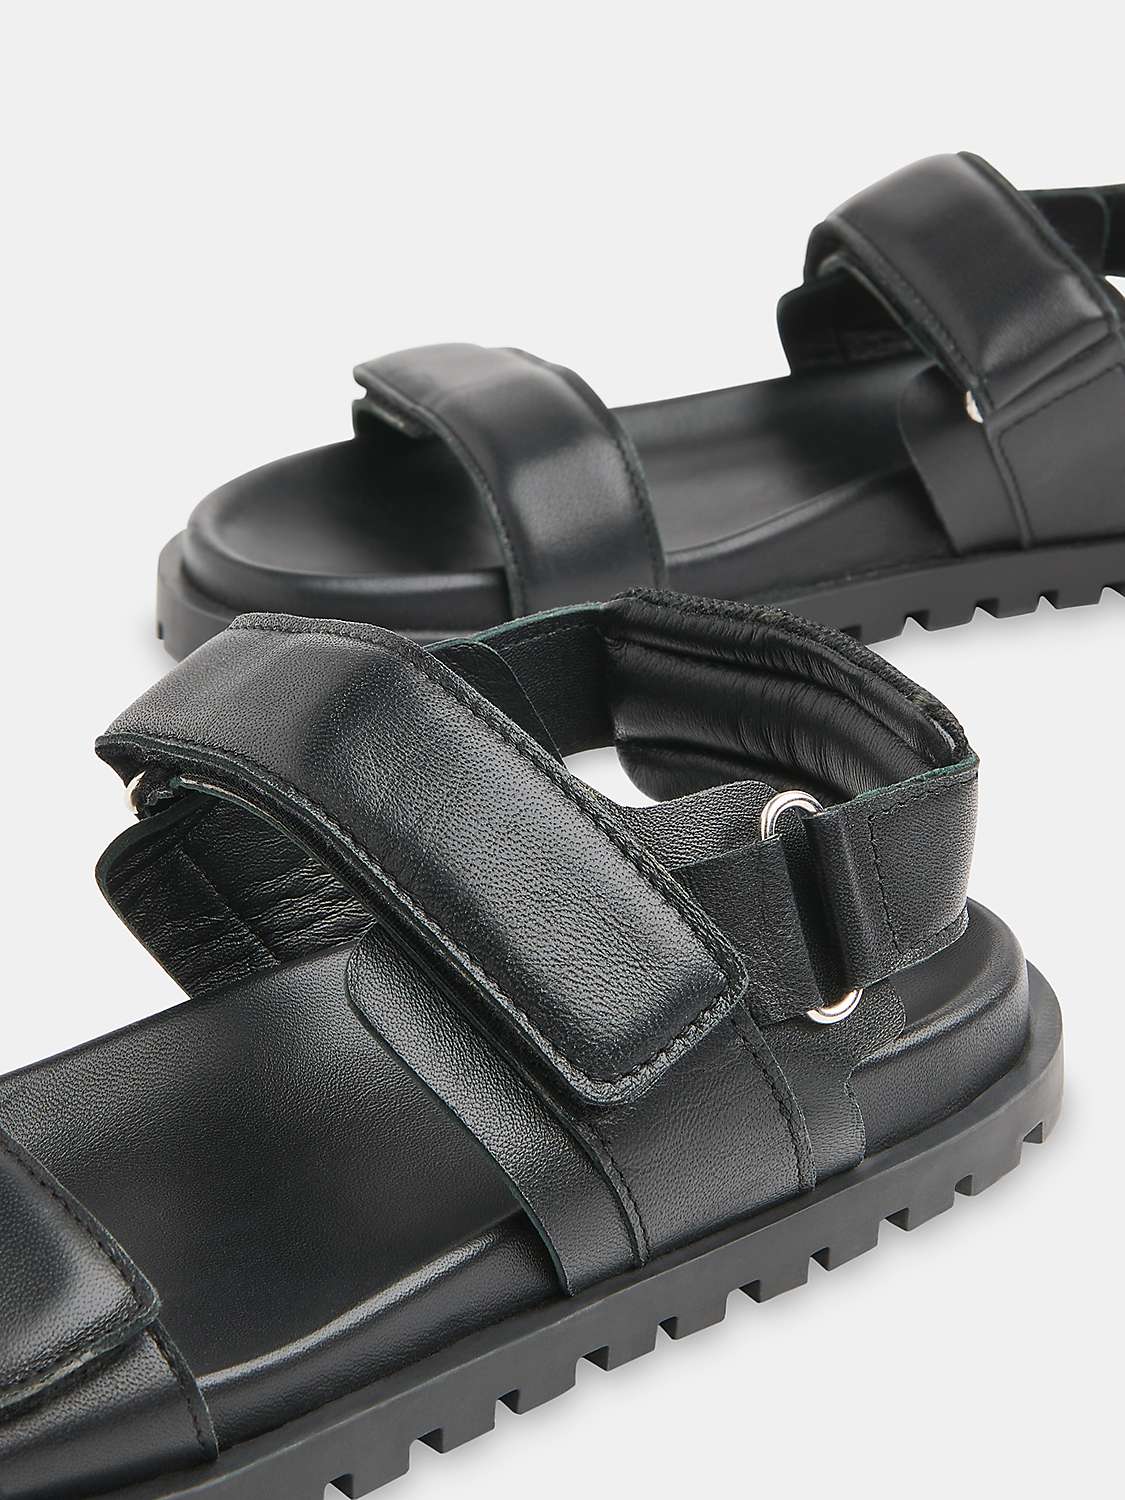 Buy Whistles Ria Sporty Velcro Strap Leather Sandals Online at johnlewis.com